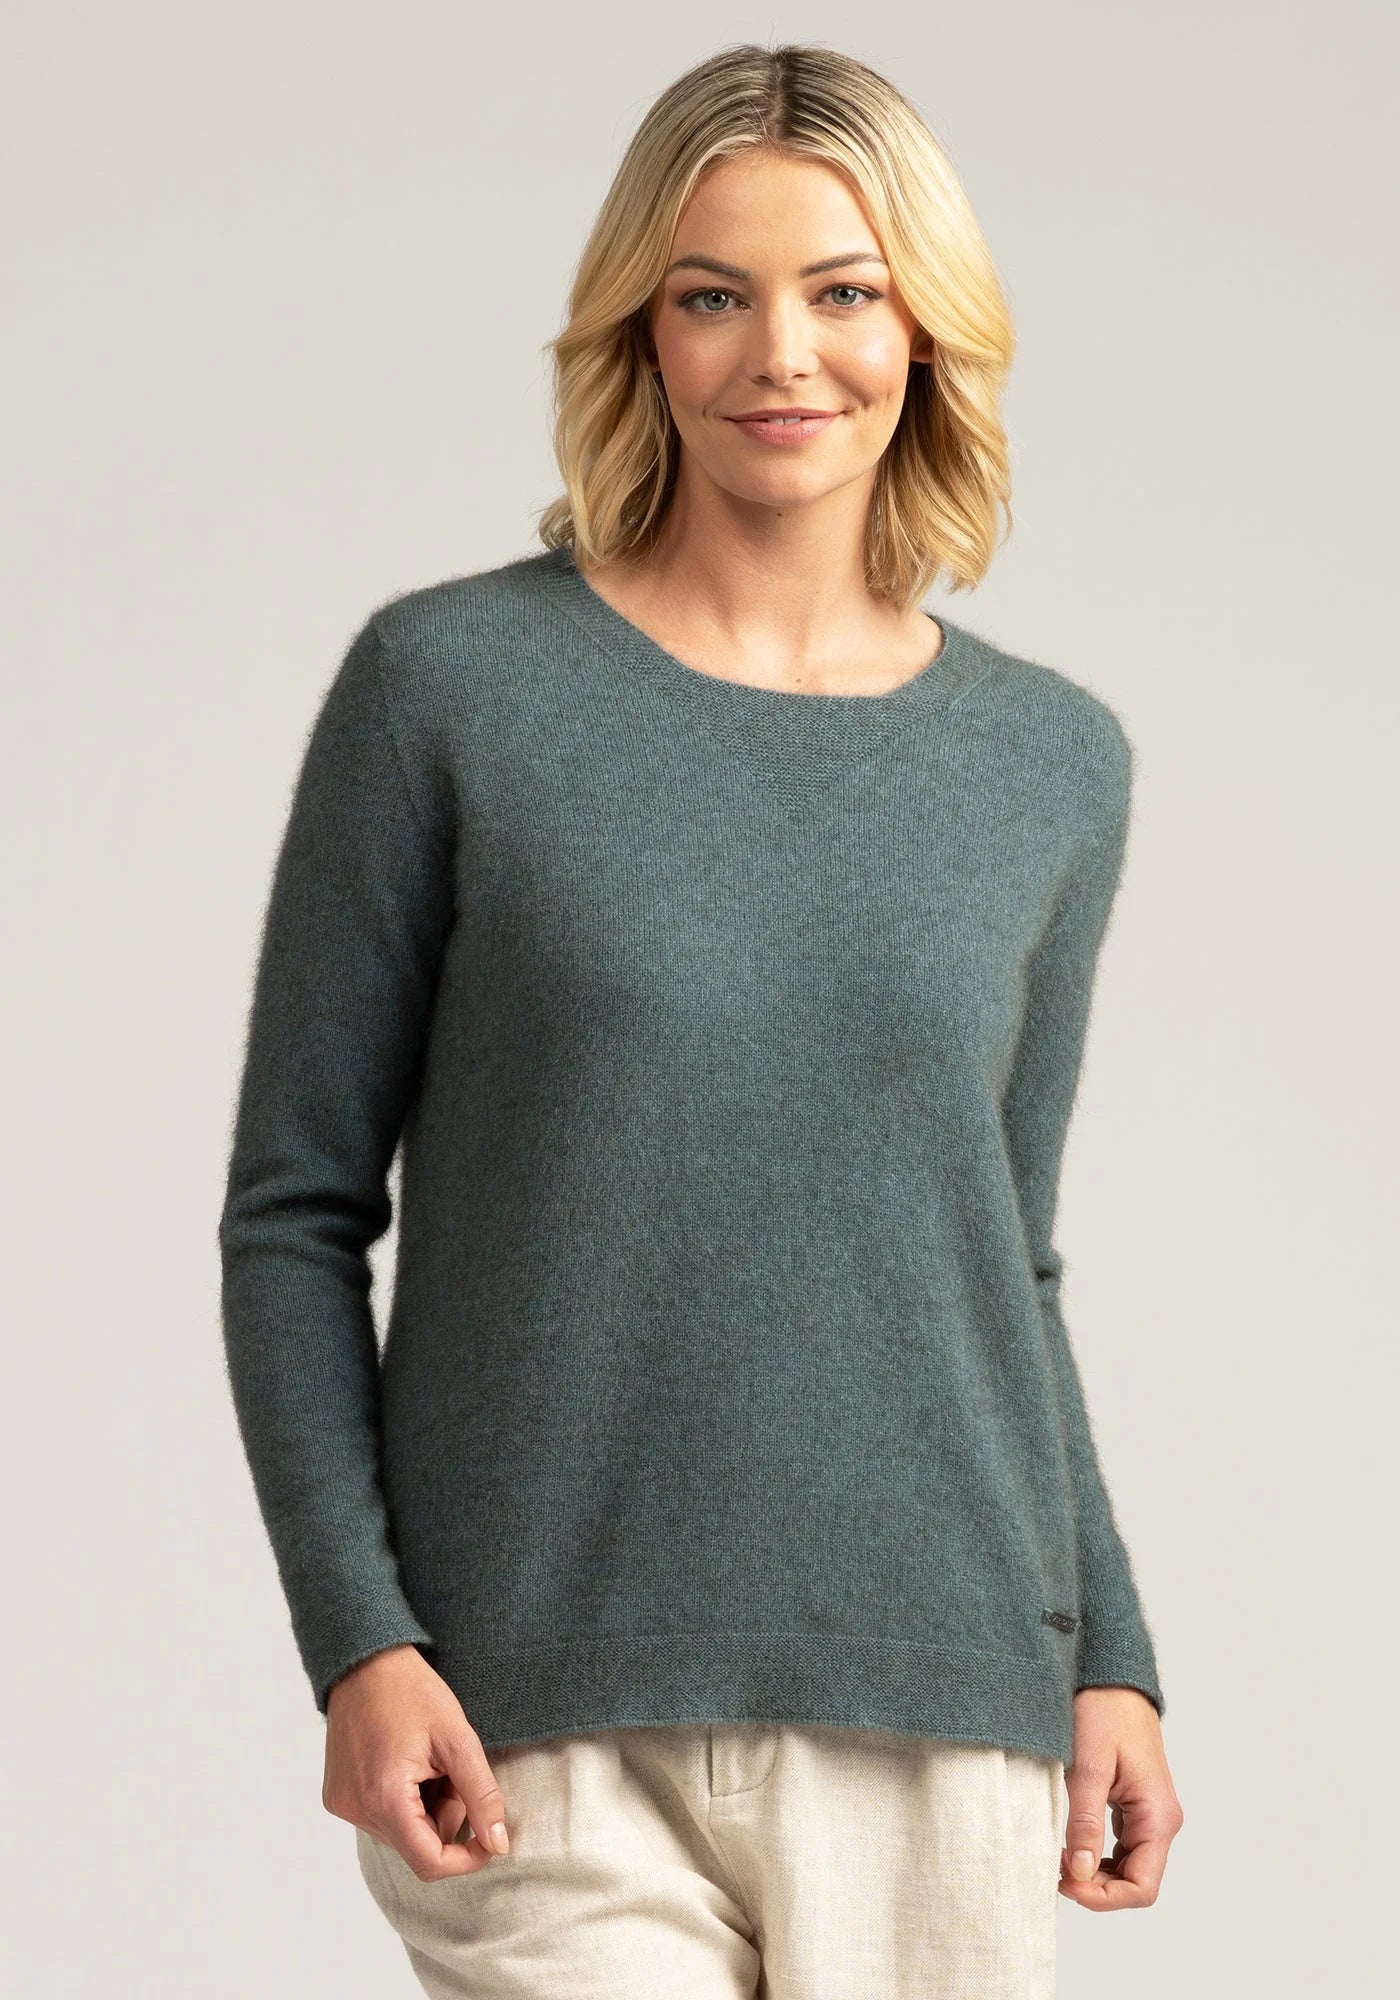 "Elevate your look with our grey merino wool sweater. Superior warmth, style, and durability in one."